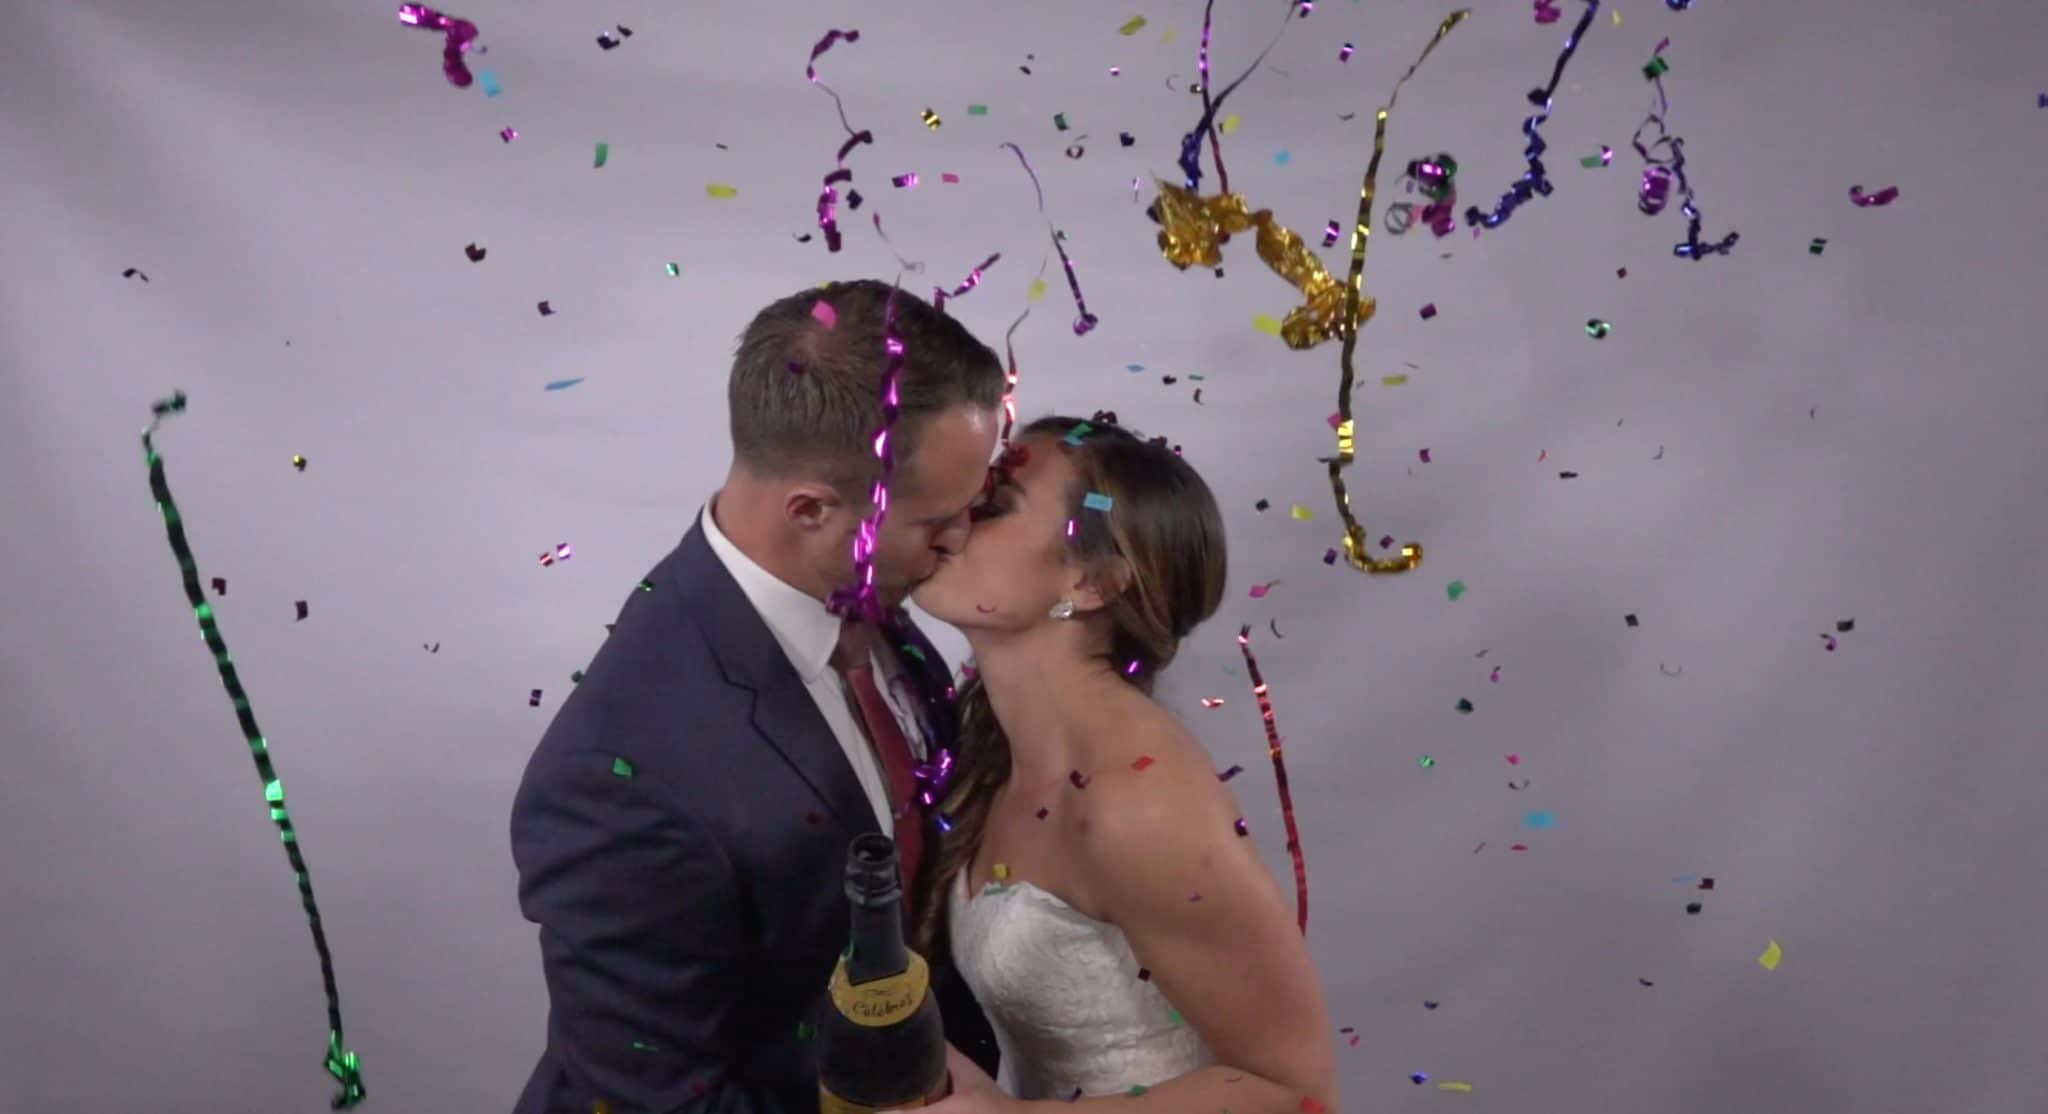 Omarvelous Productions - bride and groom kissing with confetti, streamers, and champagne bottle